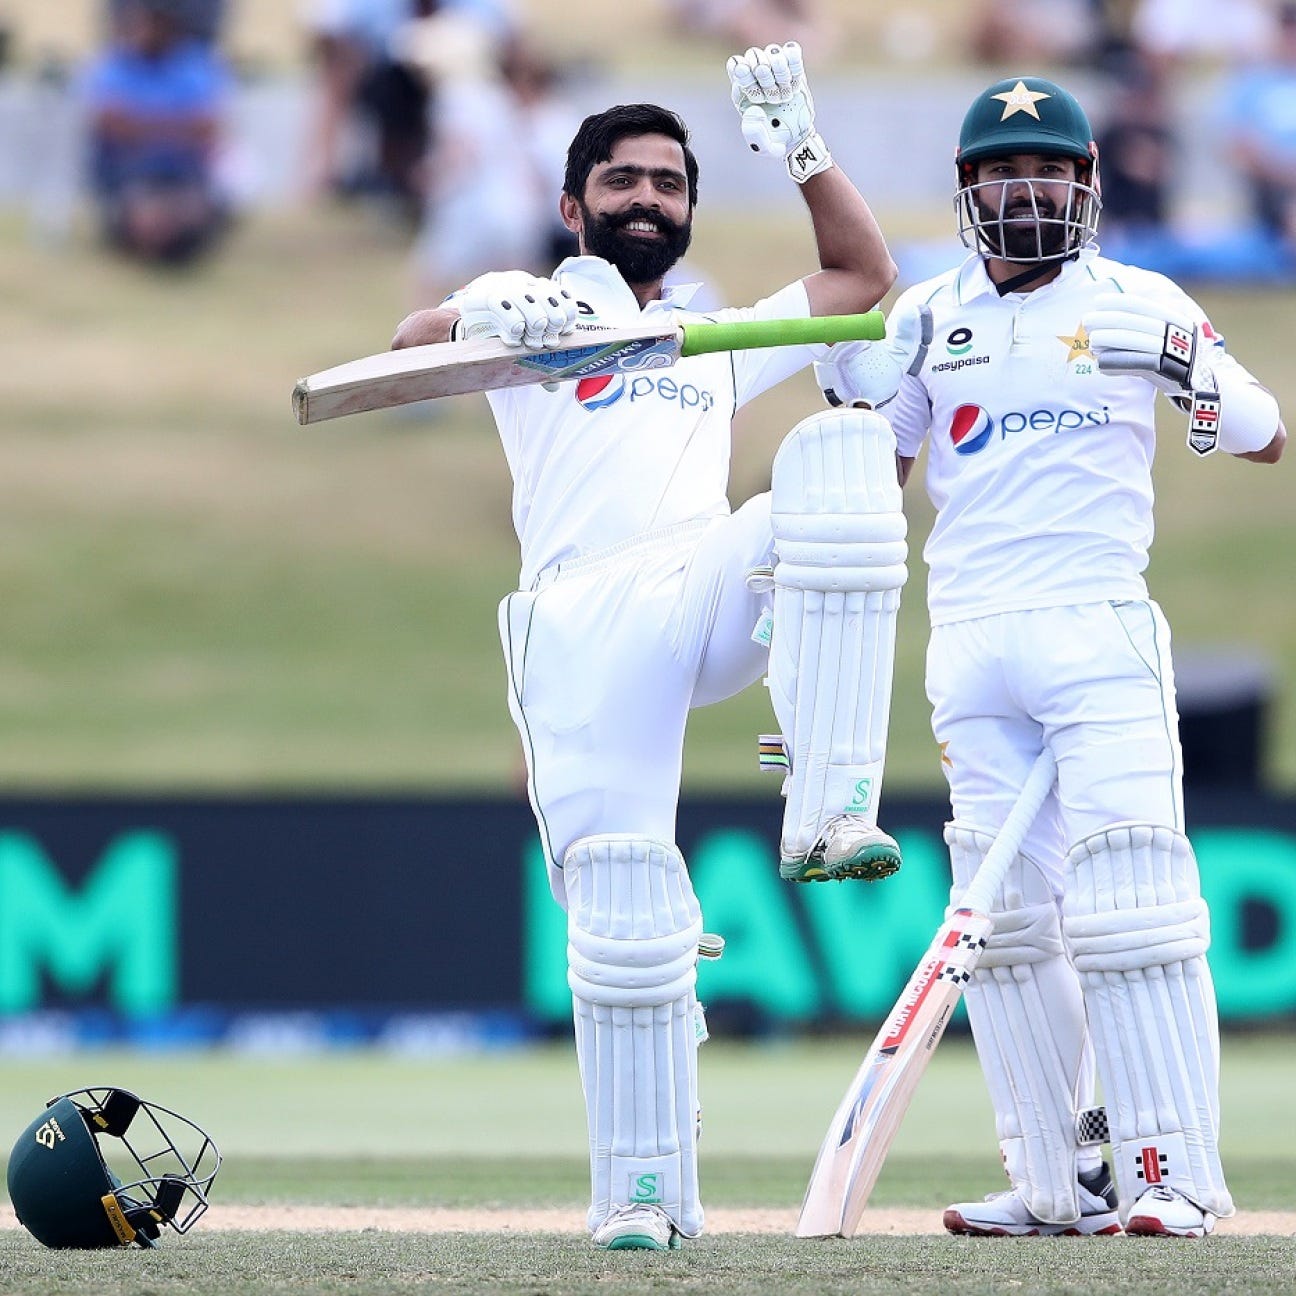 NZ vs Pak 1st Test - Fawad Alam gets his vindication, a decade in the making